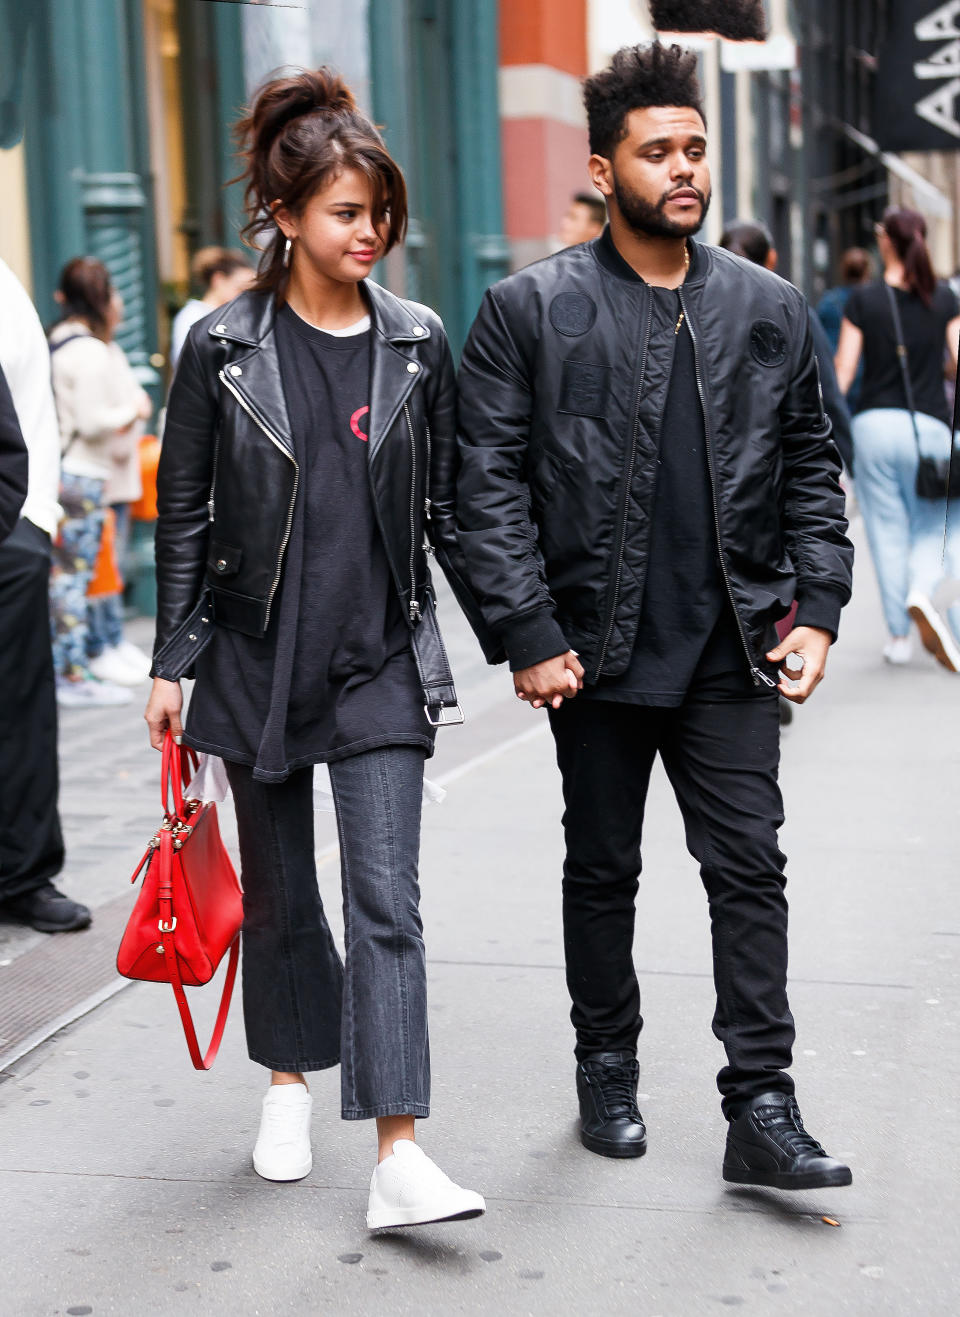 The singers were spotted looking cute and coordinated in New York.